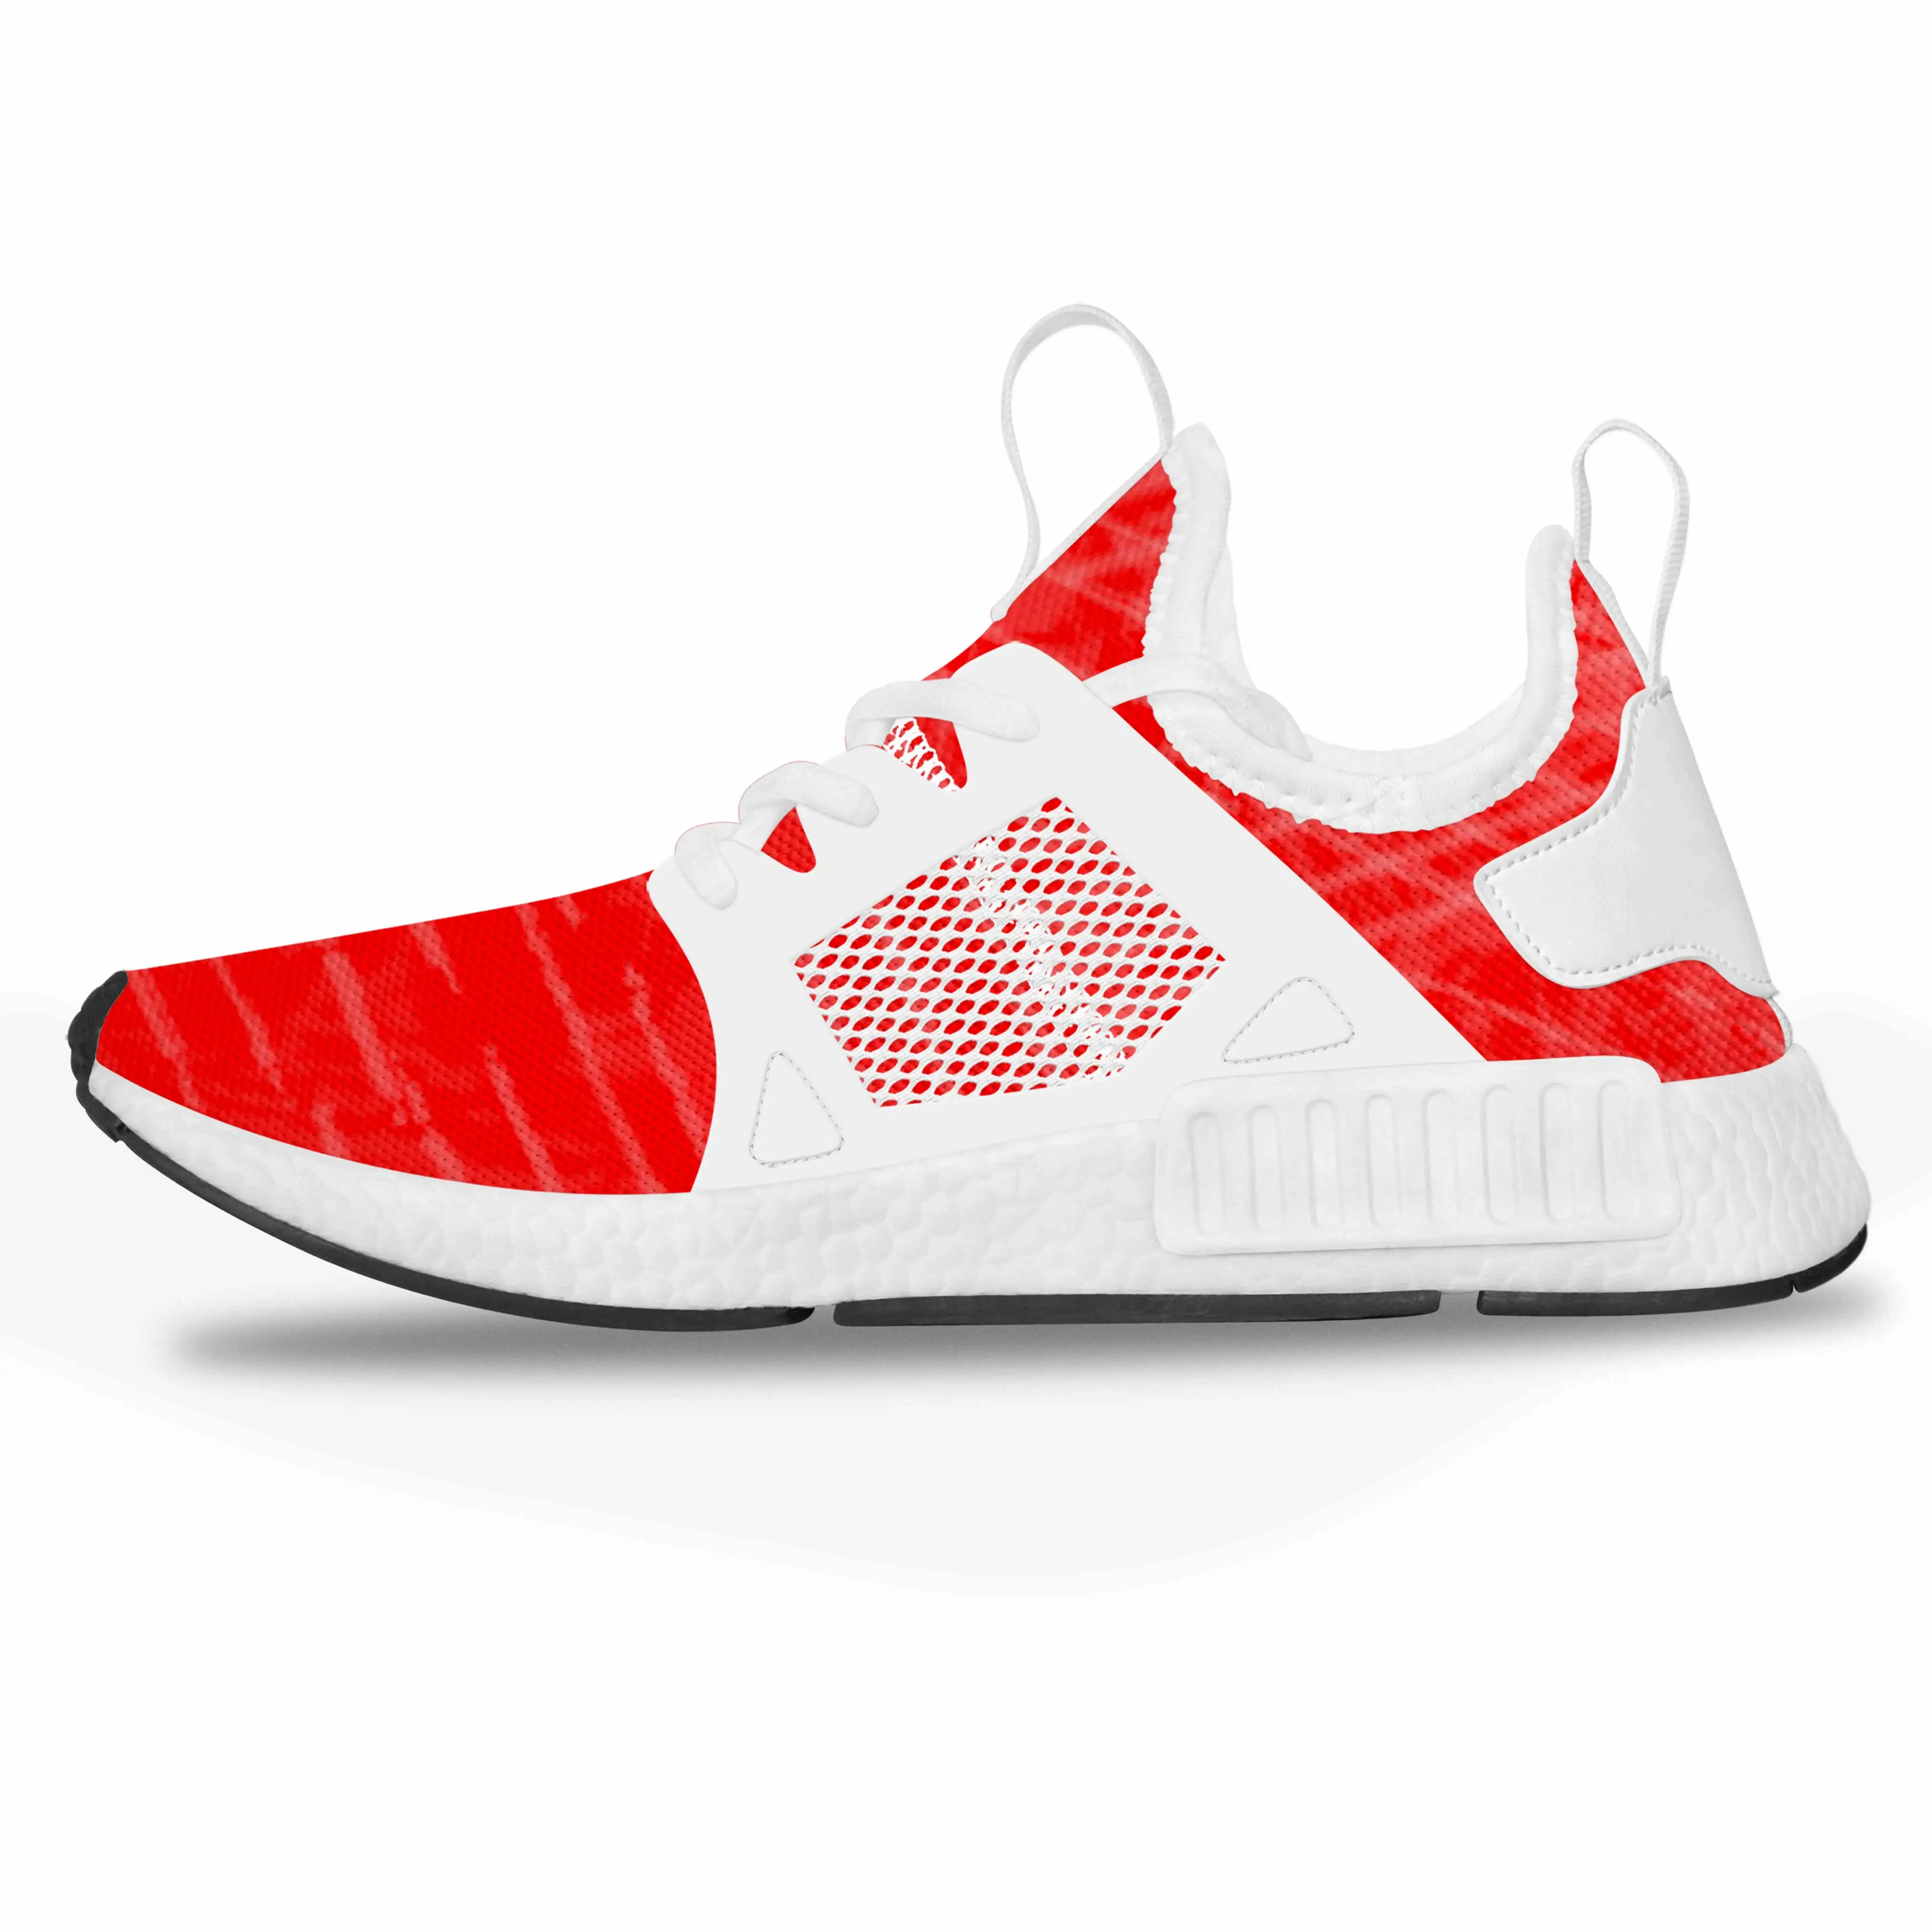 

Professional custom men breathable sports shoes mesh upper NMD R1 running sneakers, As your request